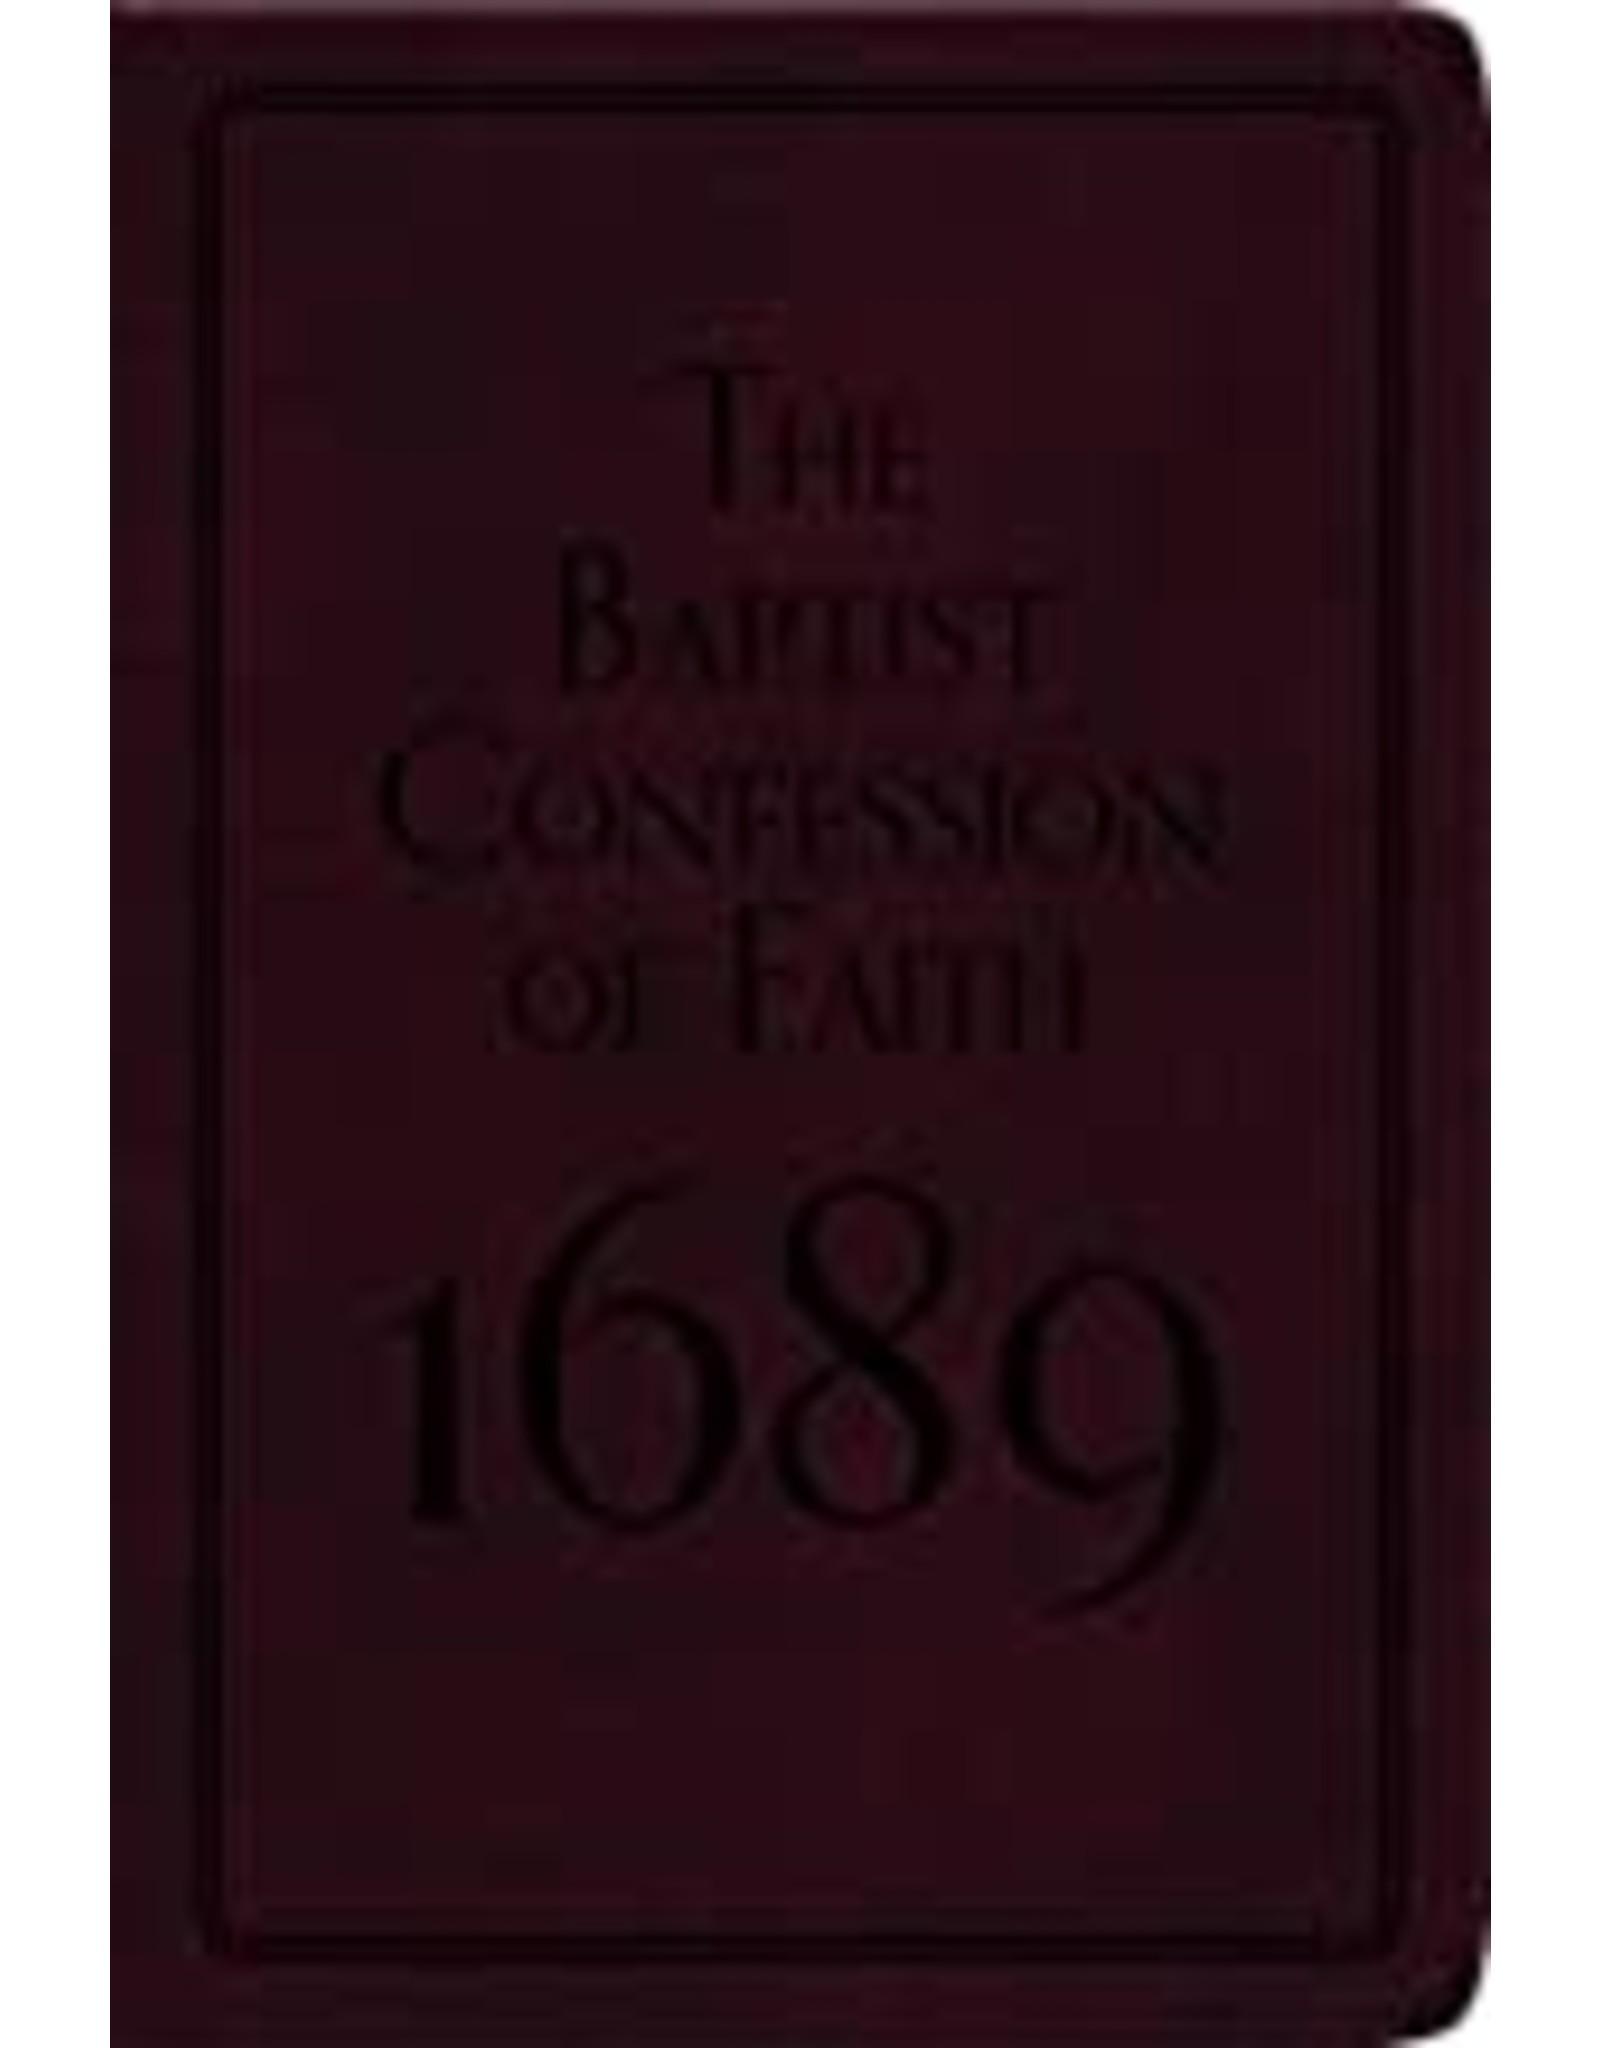 Various The Baptist Confession of Faith 1689 - Gift Edition